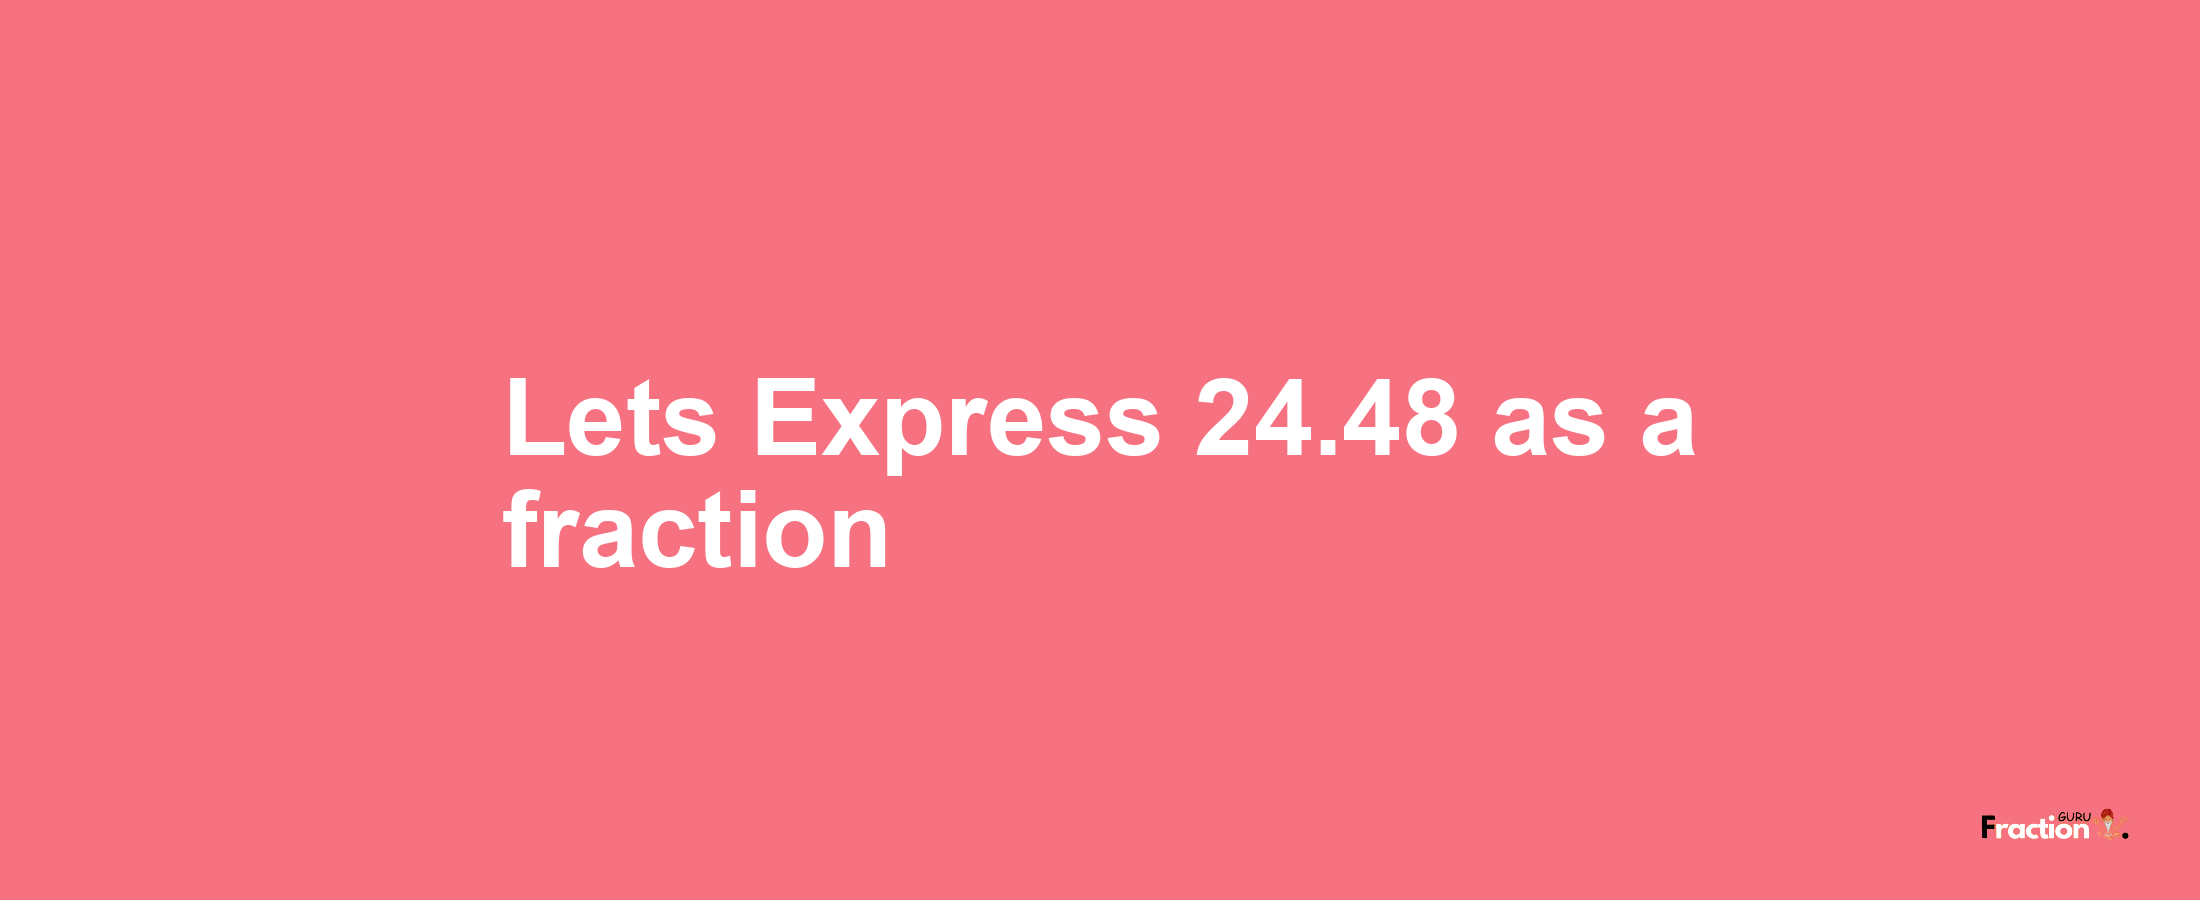 Lets Express 24.48 as afraction